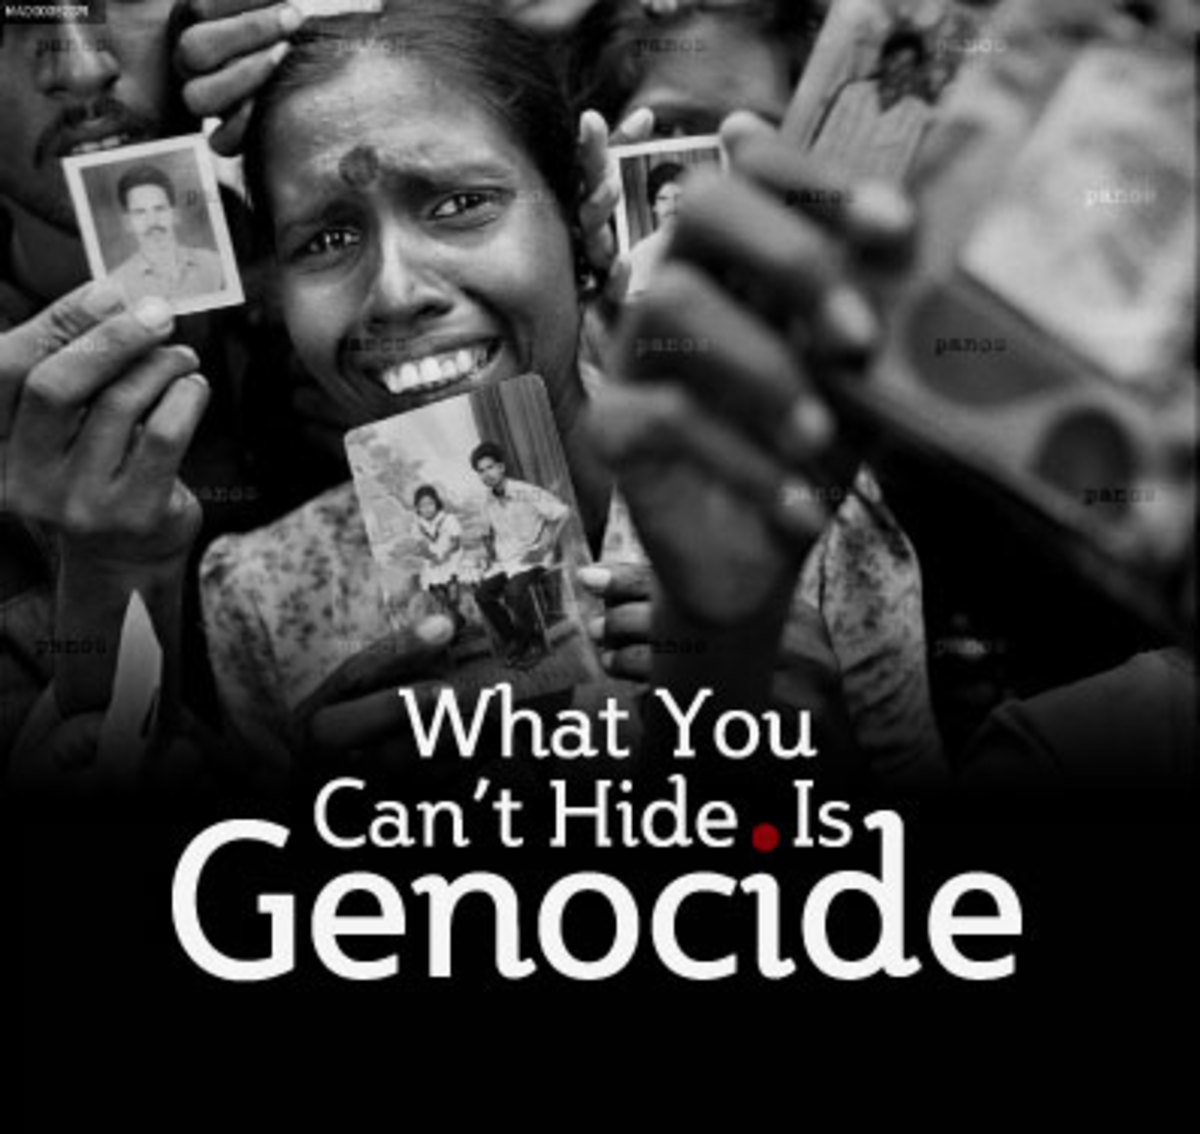 genocide-in-hstory